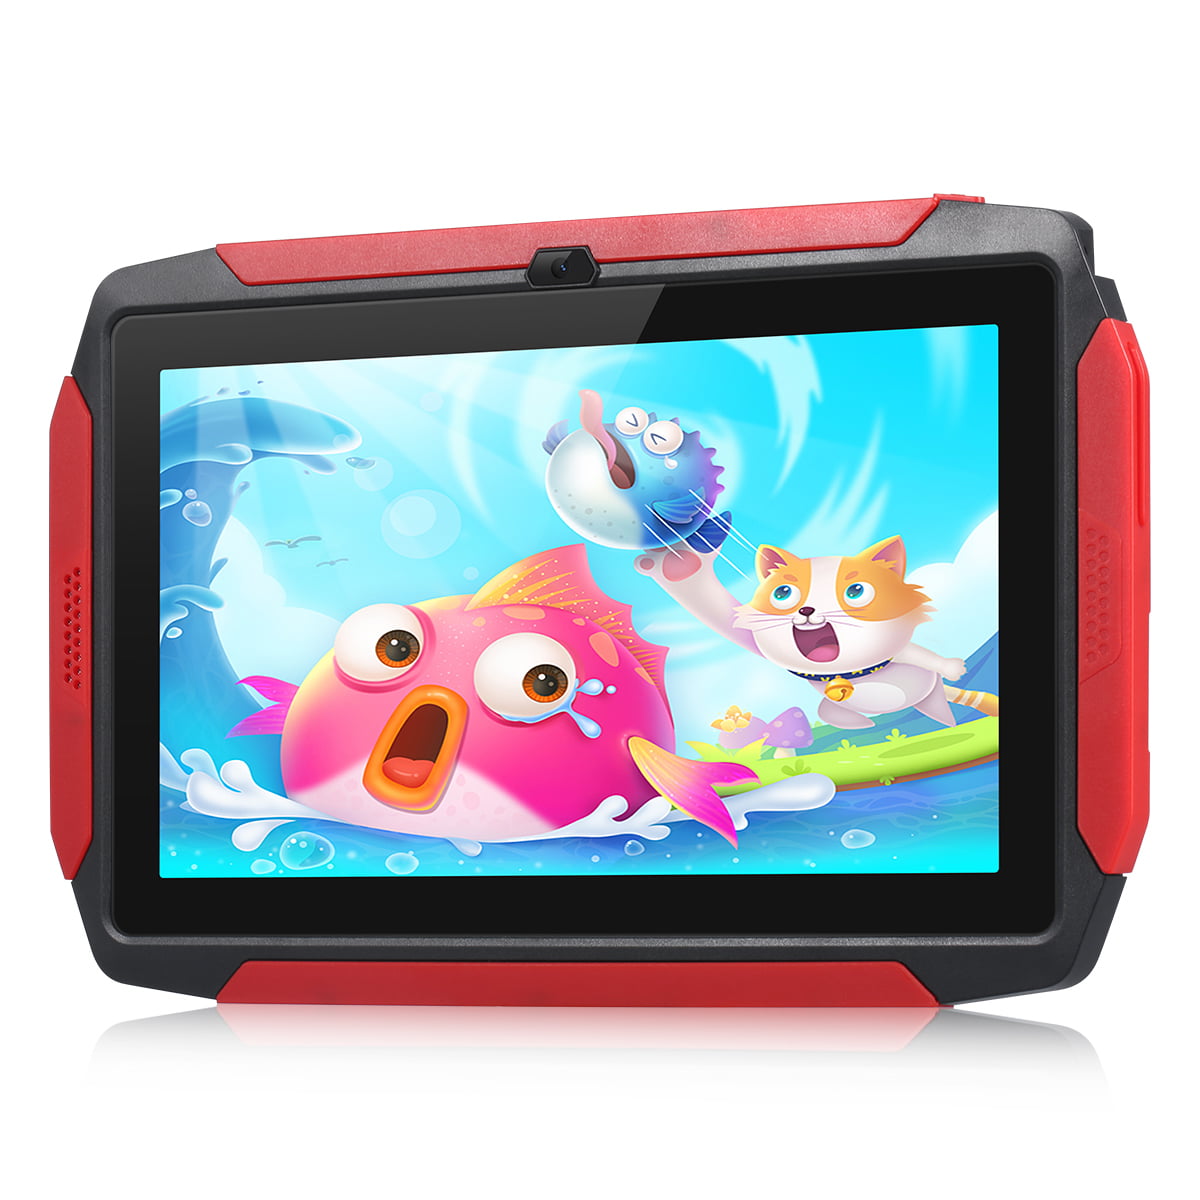 Excelvan Q98 Android Kids Tablet PC, 7